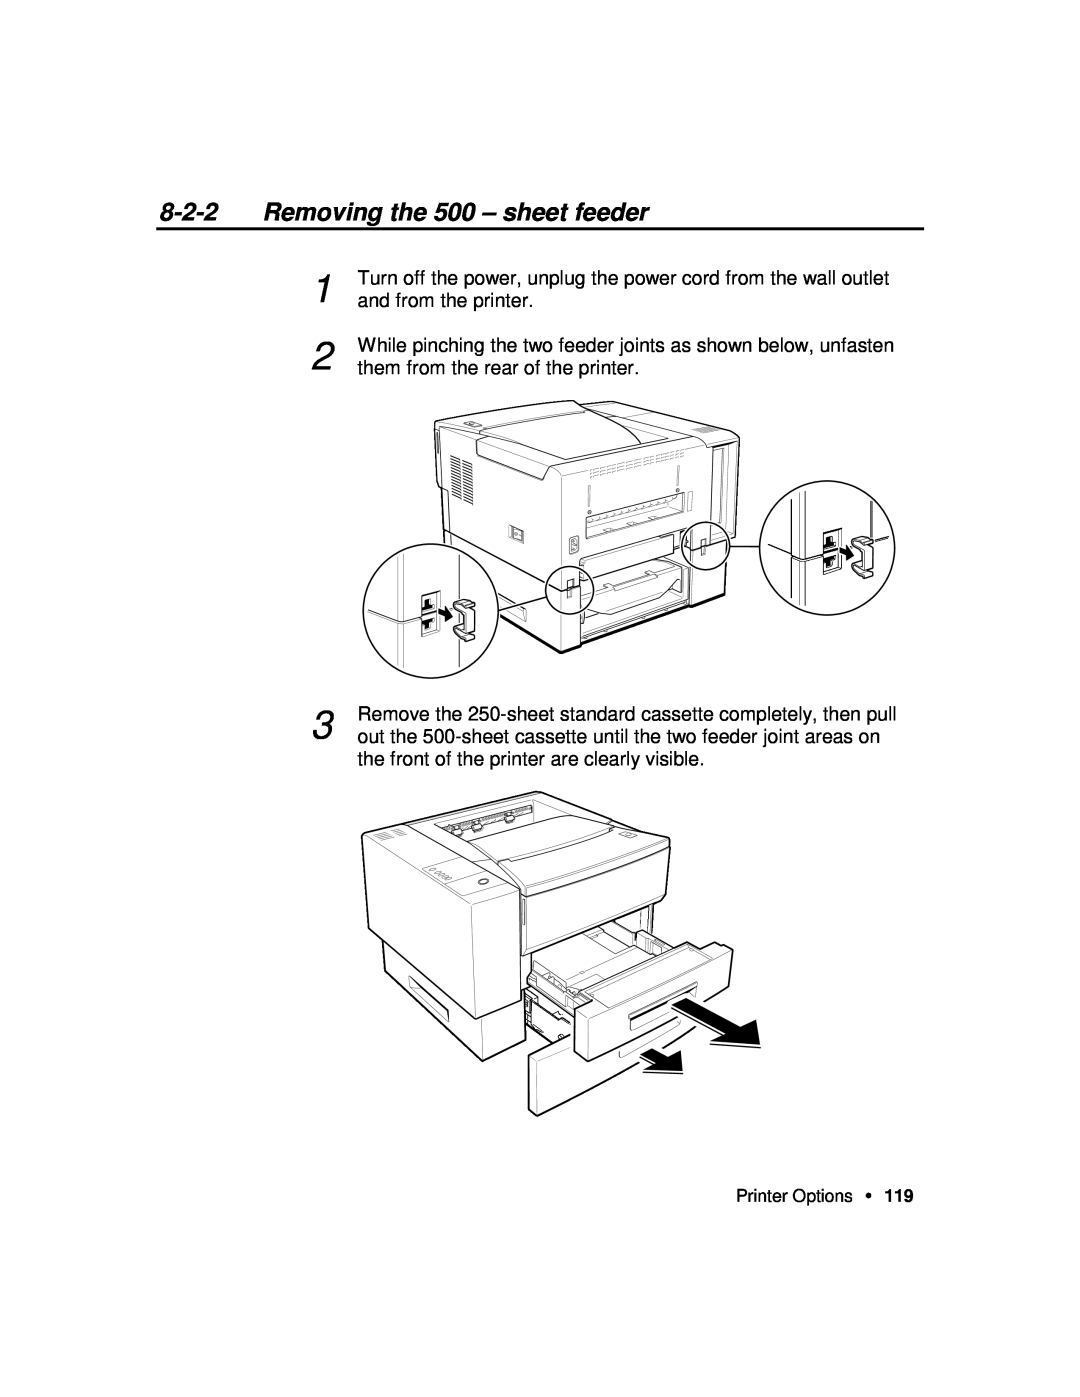 Xerox P12 manual Removing the 500 - sheet feeder, While pinching the two feeder joints as shown below, unfasten 